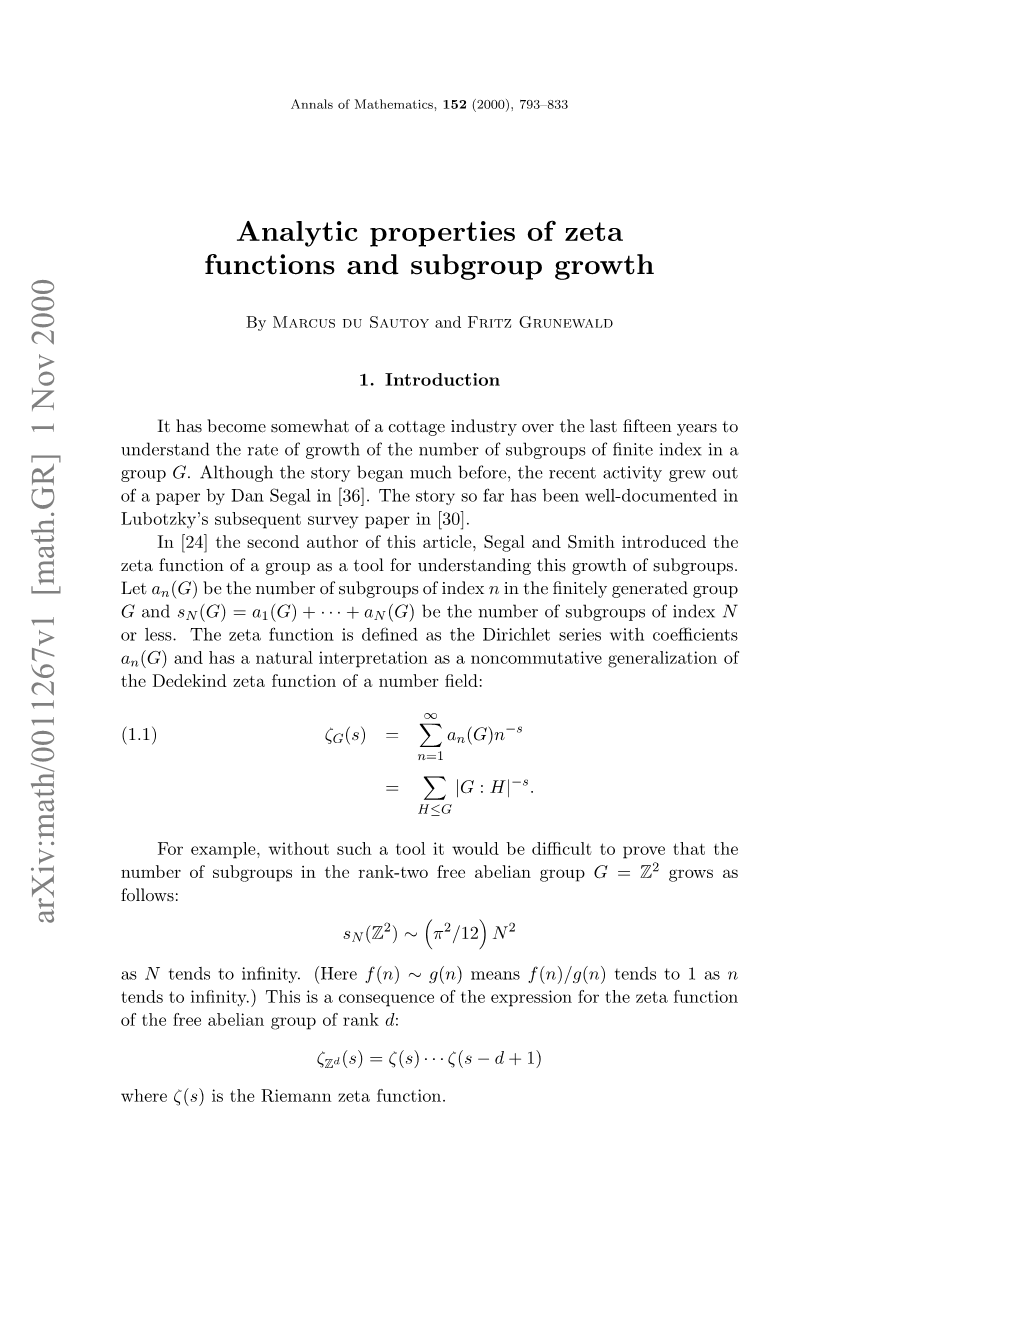 Analytic Properties of Zeta Functions and Subgroup Growth